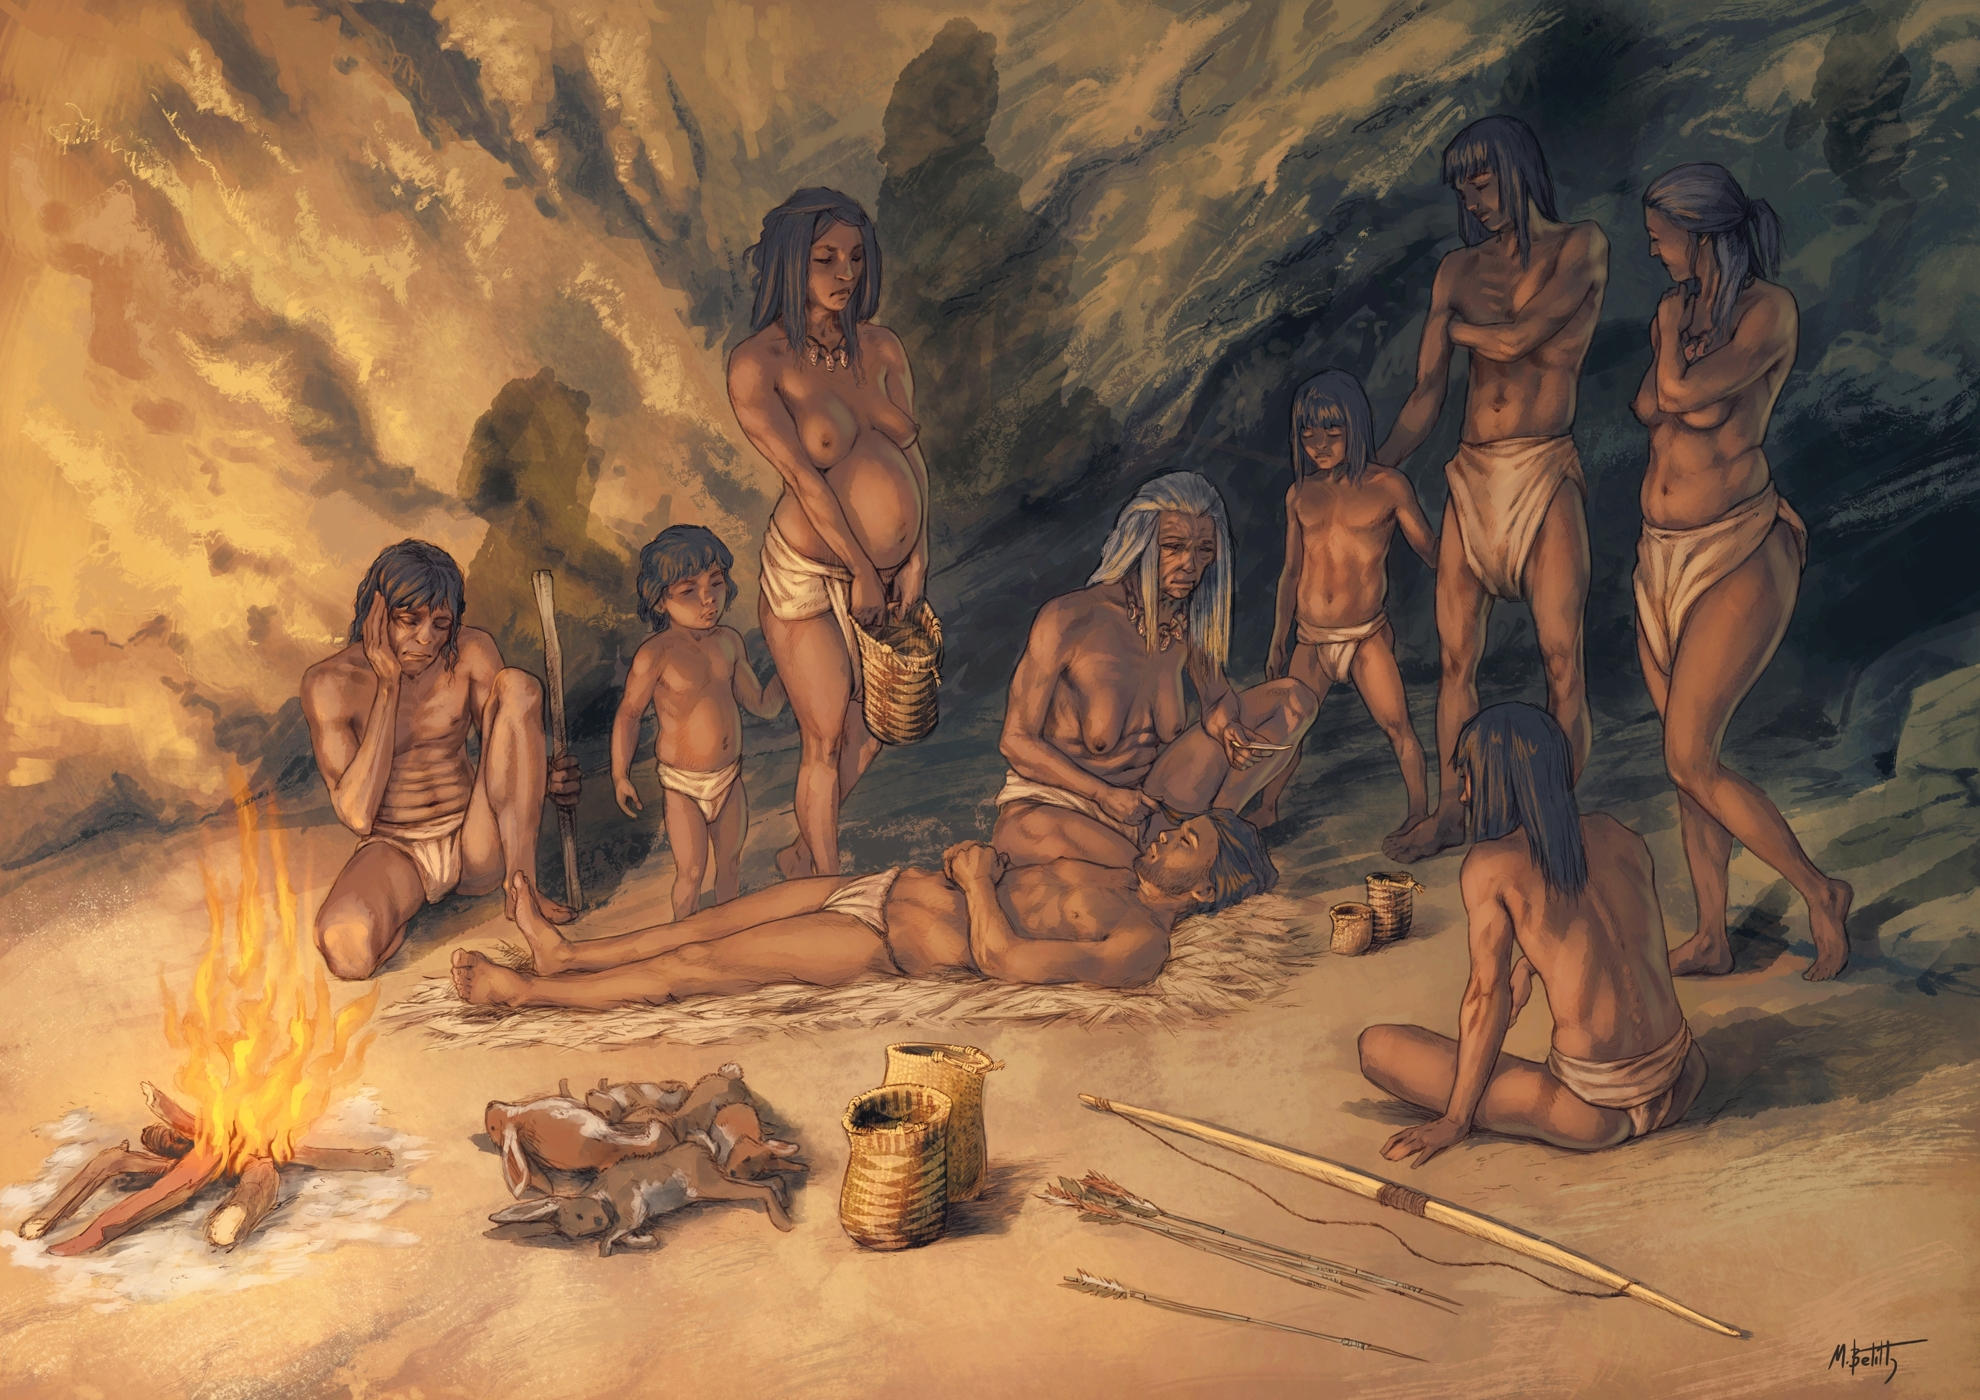 Artistic-Recreation-of-the-Use-of-Mesolithic-Baskets-by-a-Group-of-Hunter-Gatherers.jpg